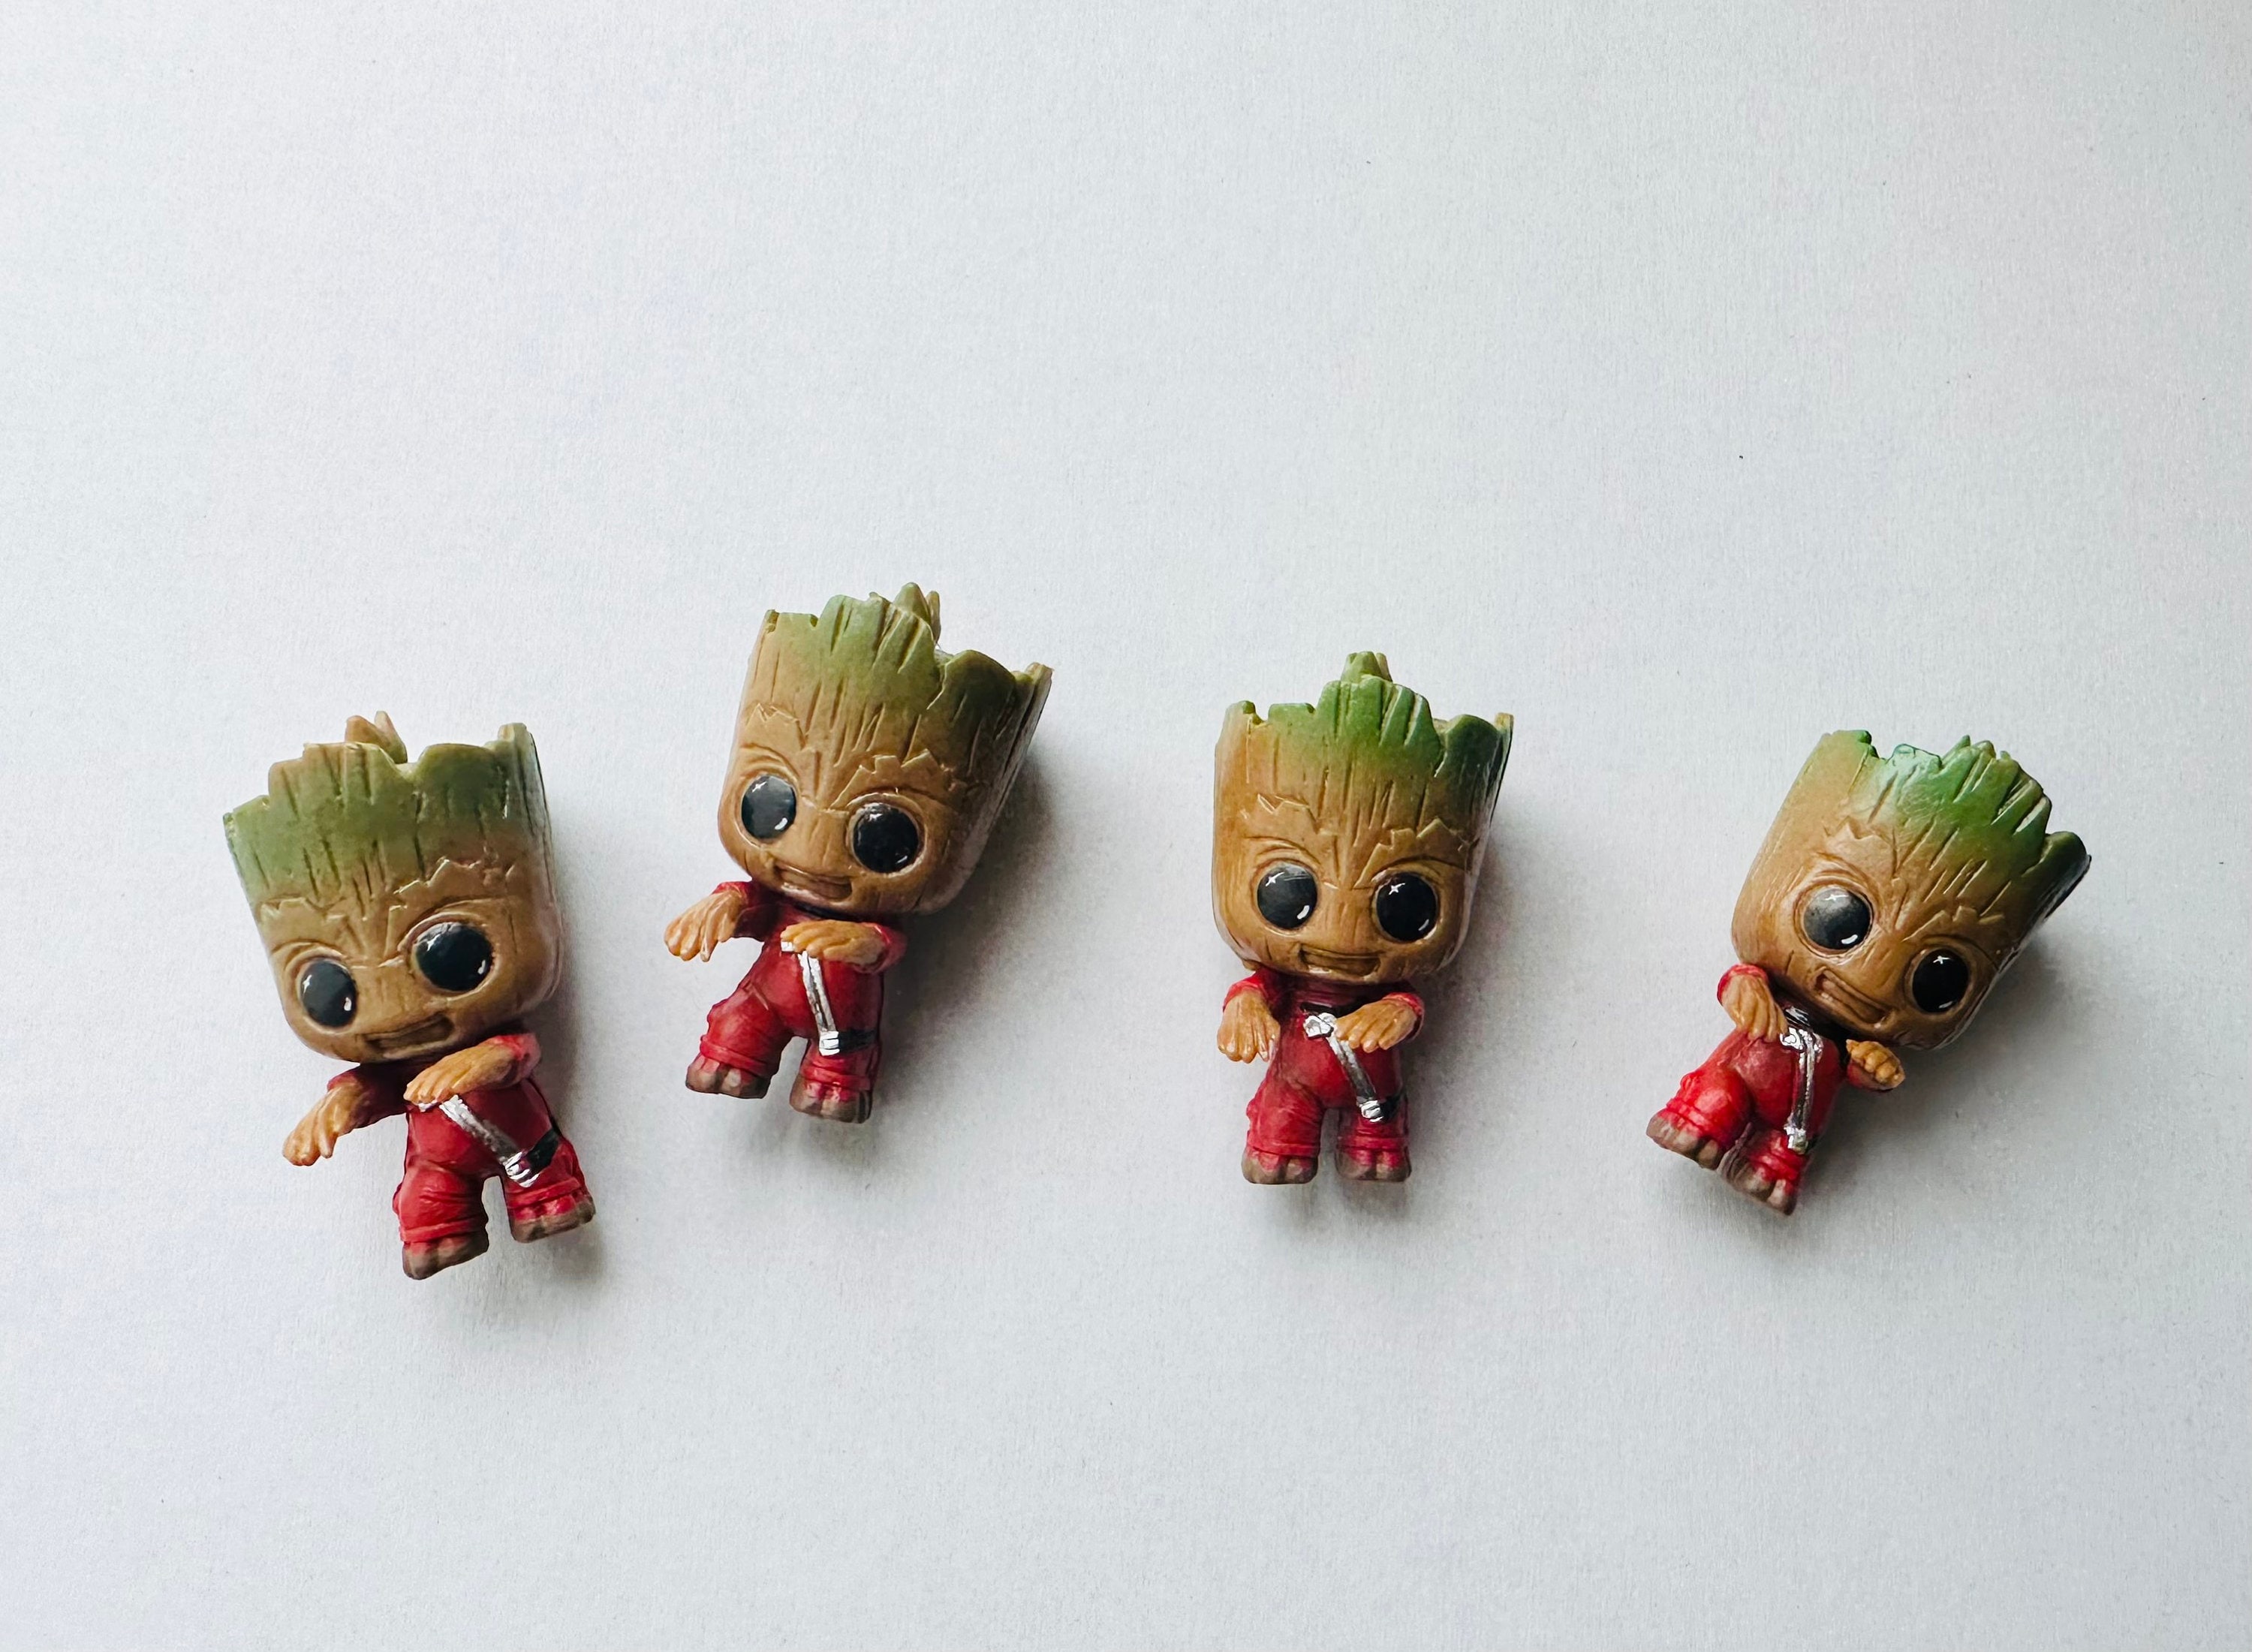 Figurine support manette - Baby groot - Objets à collectionner